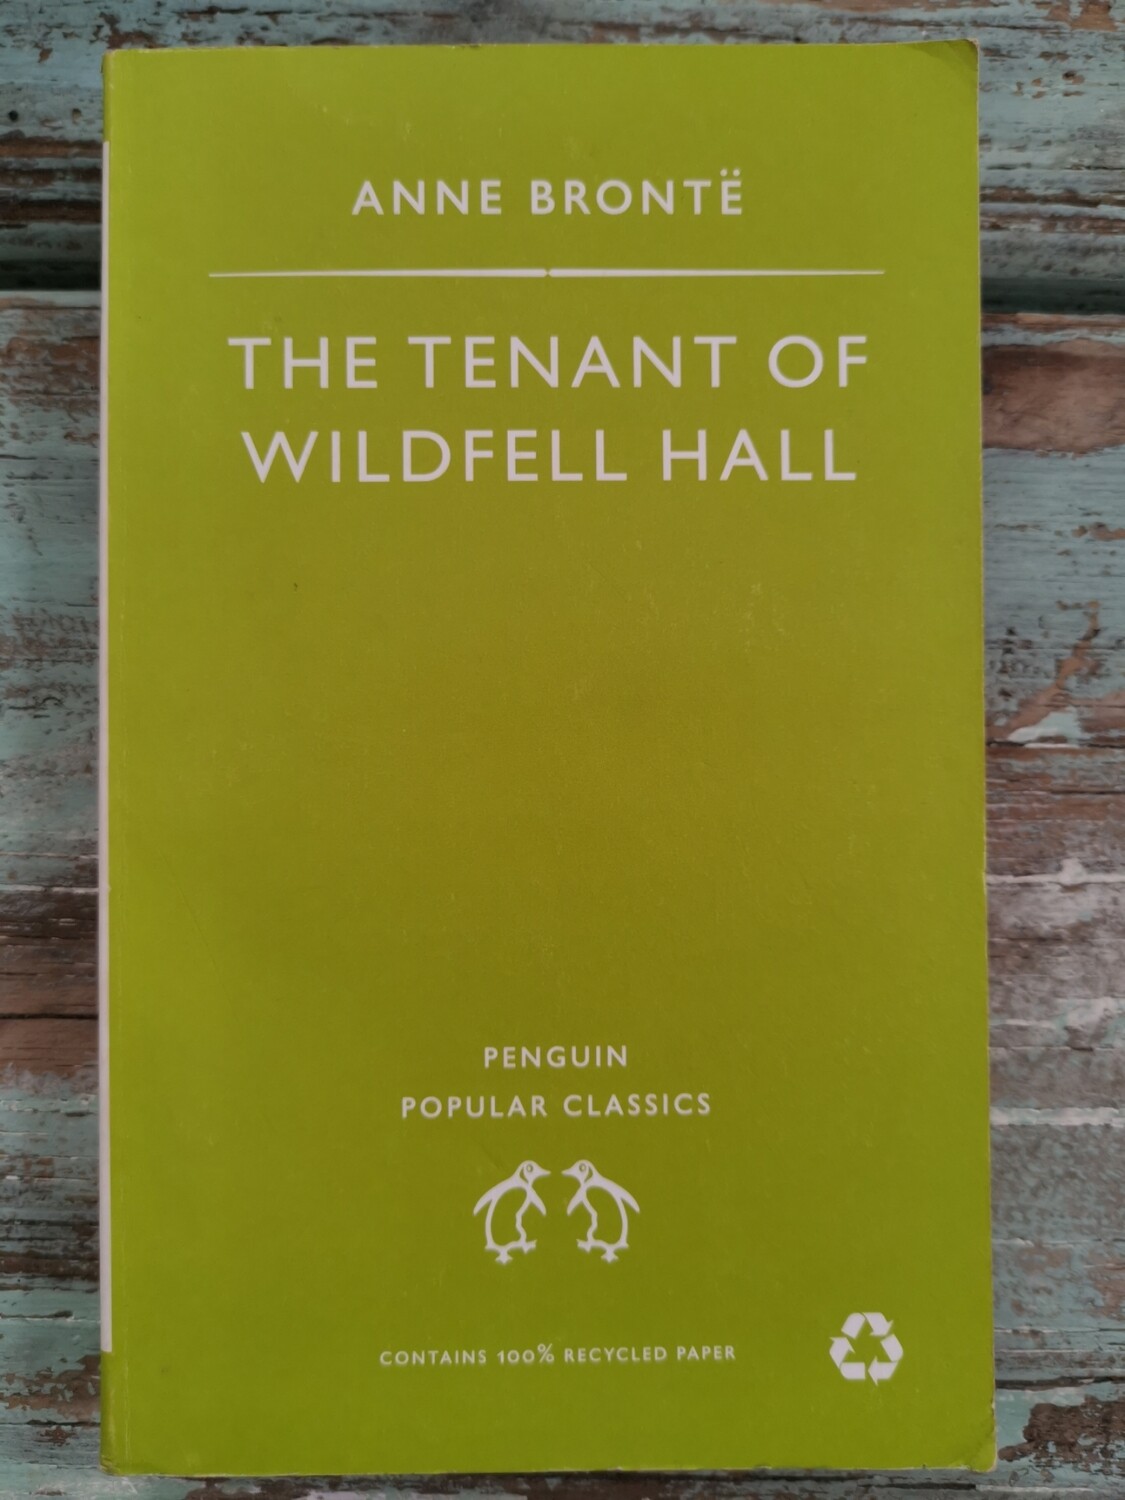 The tenant of Wildfell Hall, Anne Bronte